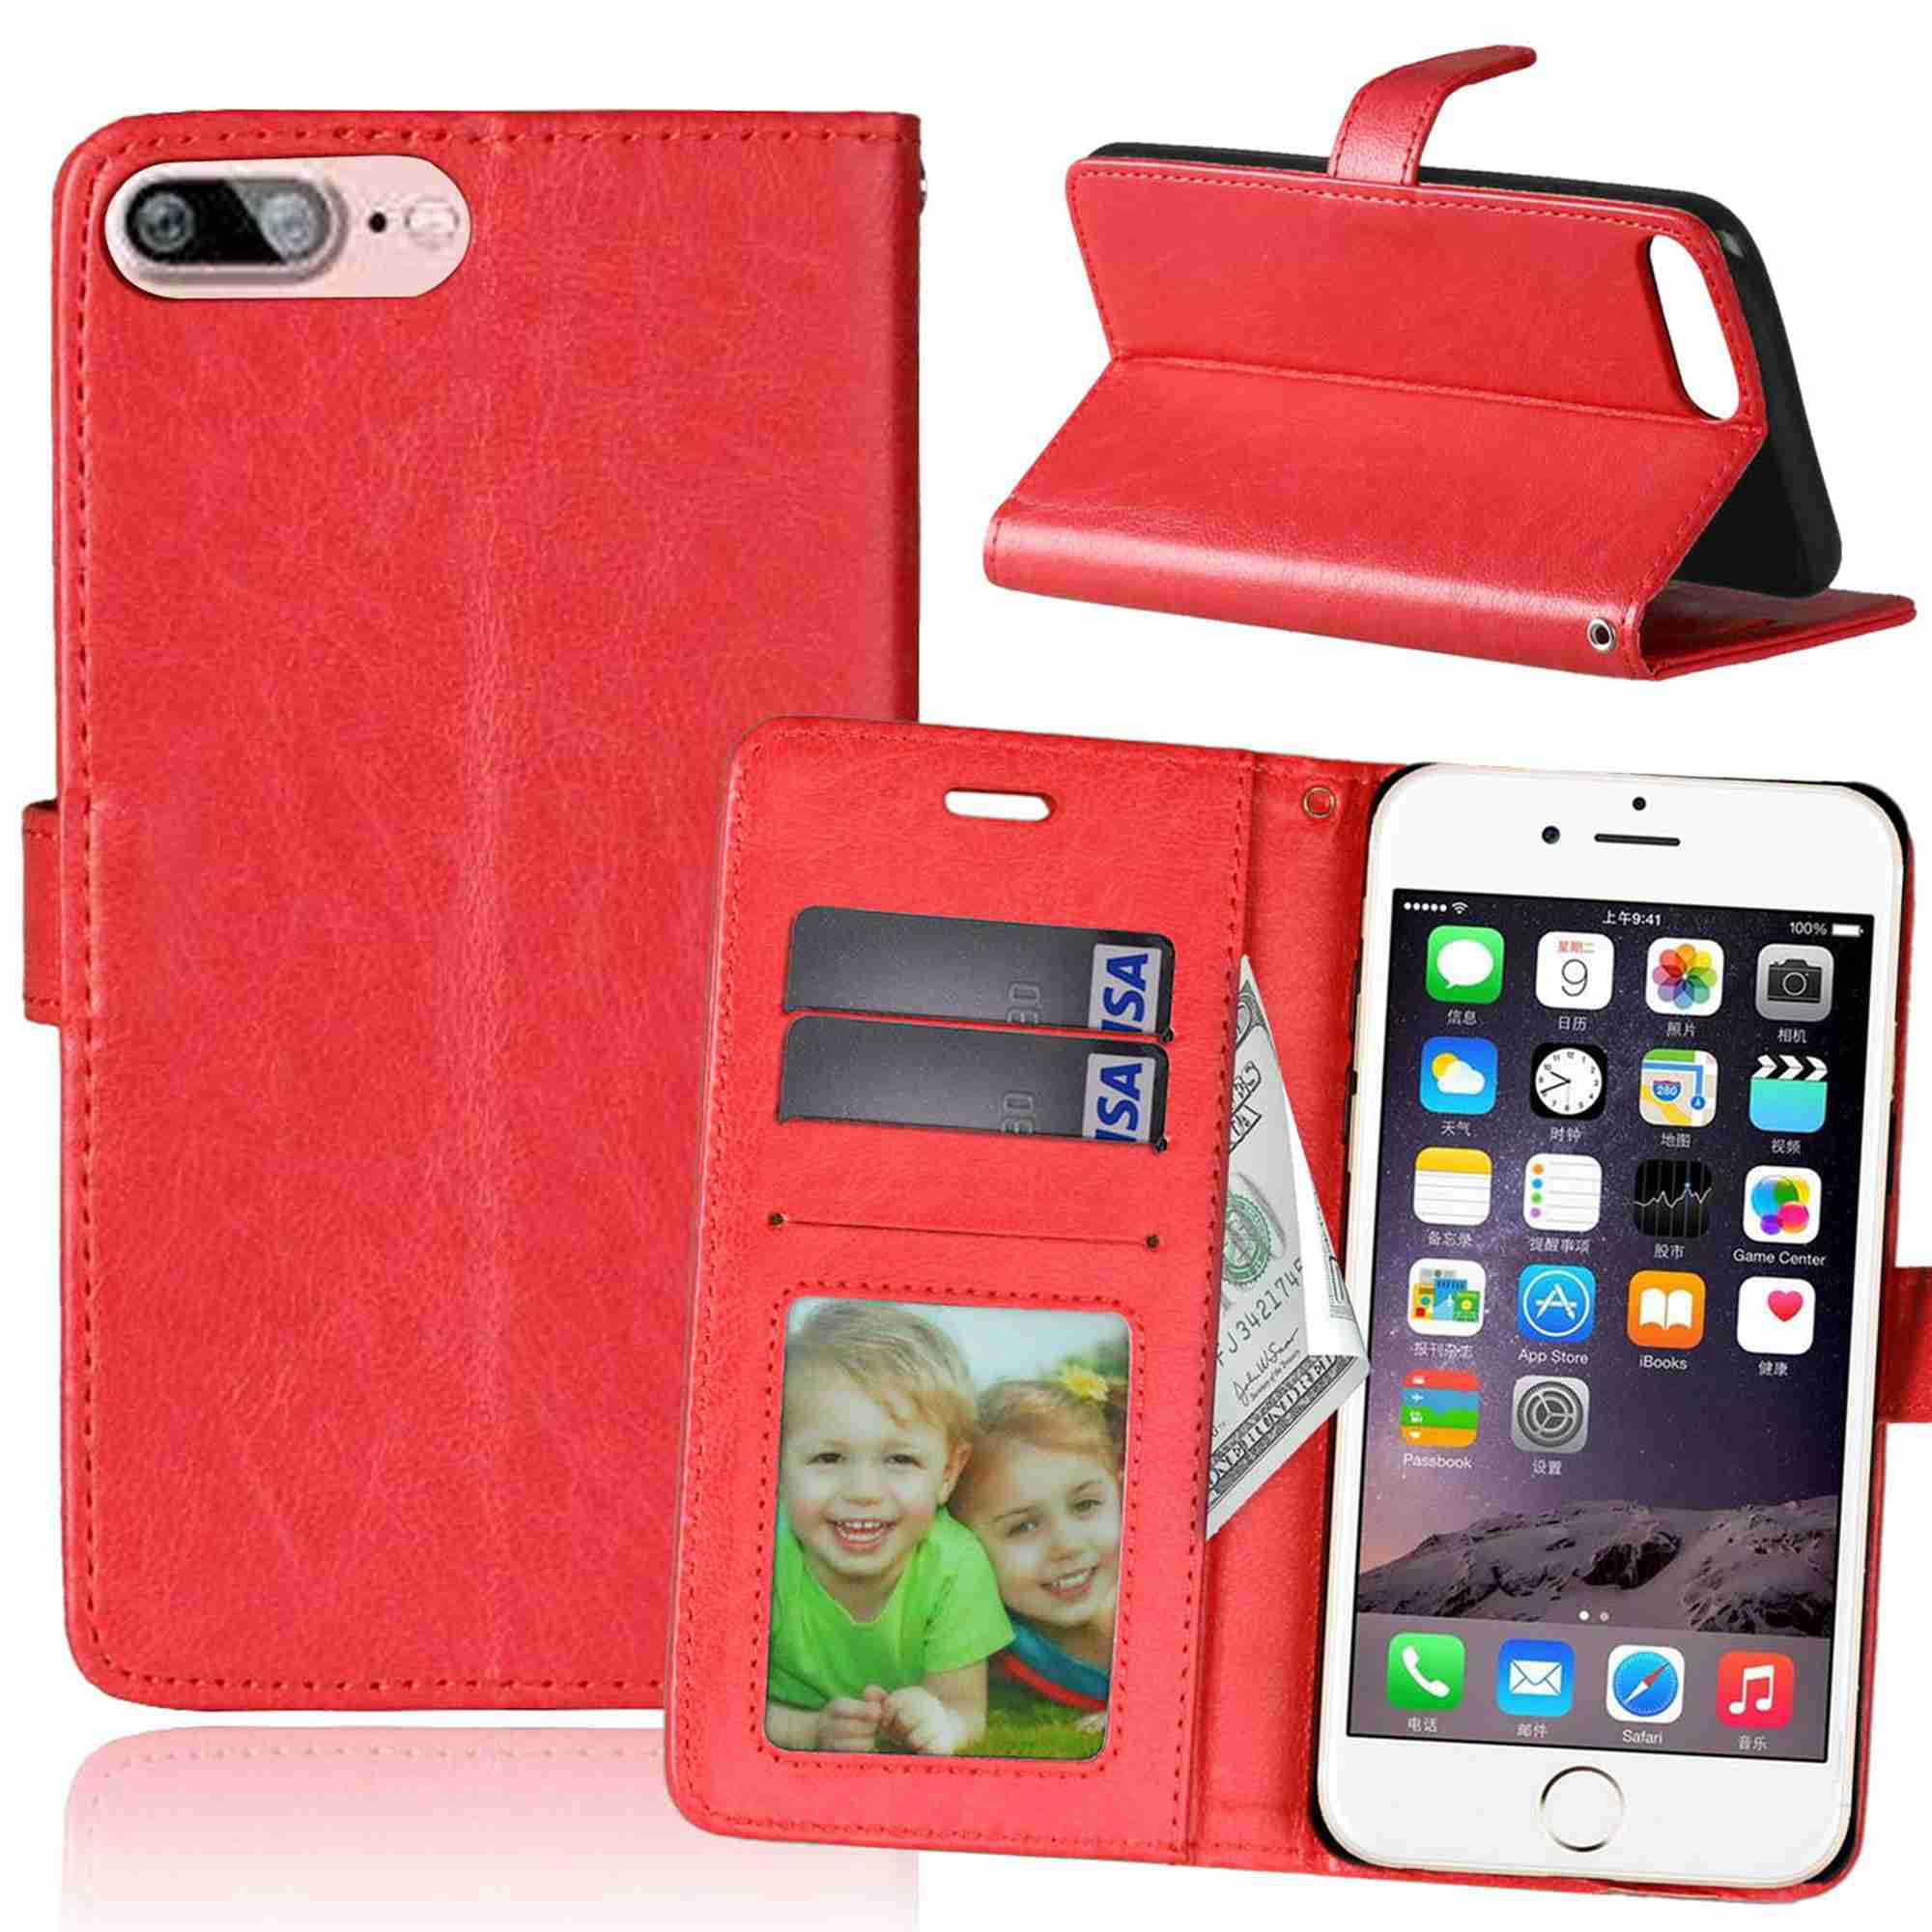 Flip Case for iPhone 8 Plus Leather Cover Extra-Protective Business Cell Phone case Card Holders Kickstand with Free Waterproof-Bag 